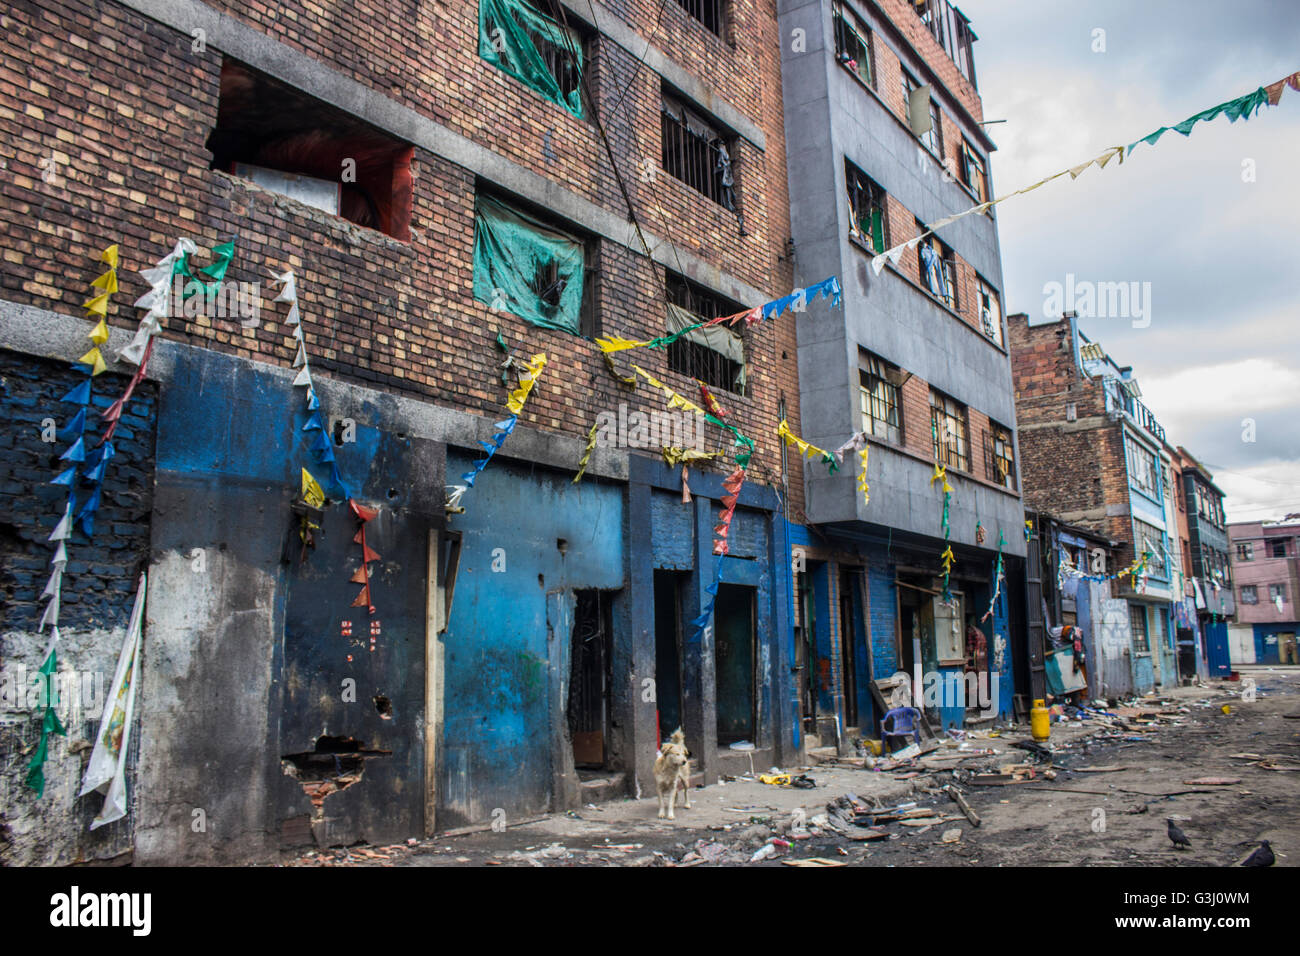 Bogota, Colombia. 31st May, 2016. The streets of the Bronx are the largest  open-air drug market where the buildings look like a war zone, police sweep  through one of Bogota's most dangerous